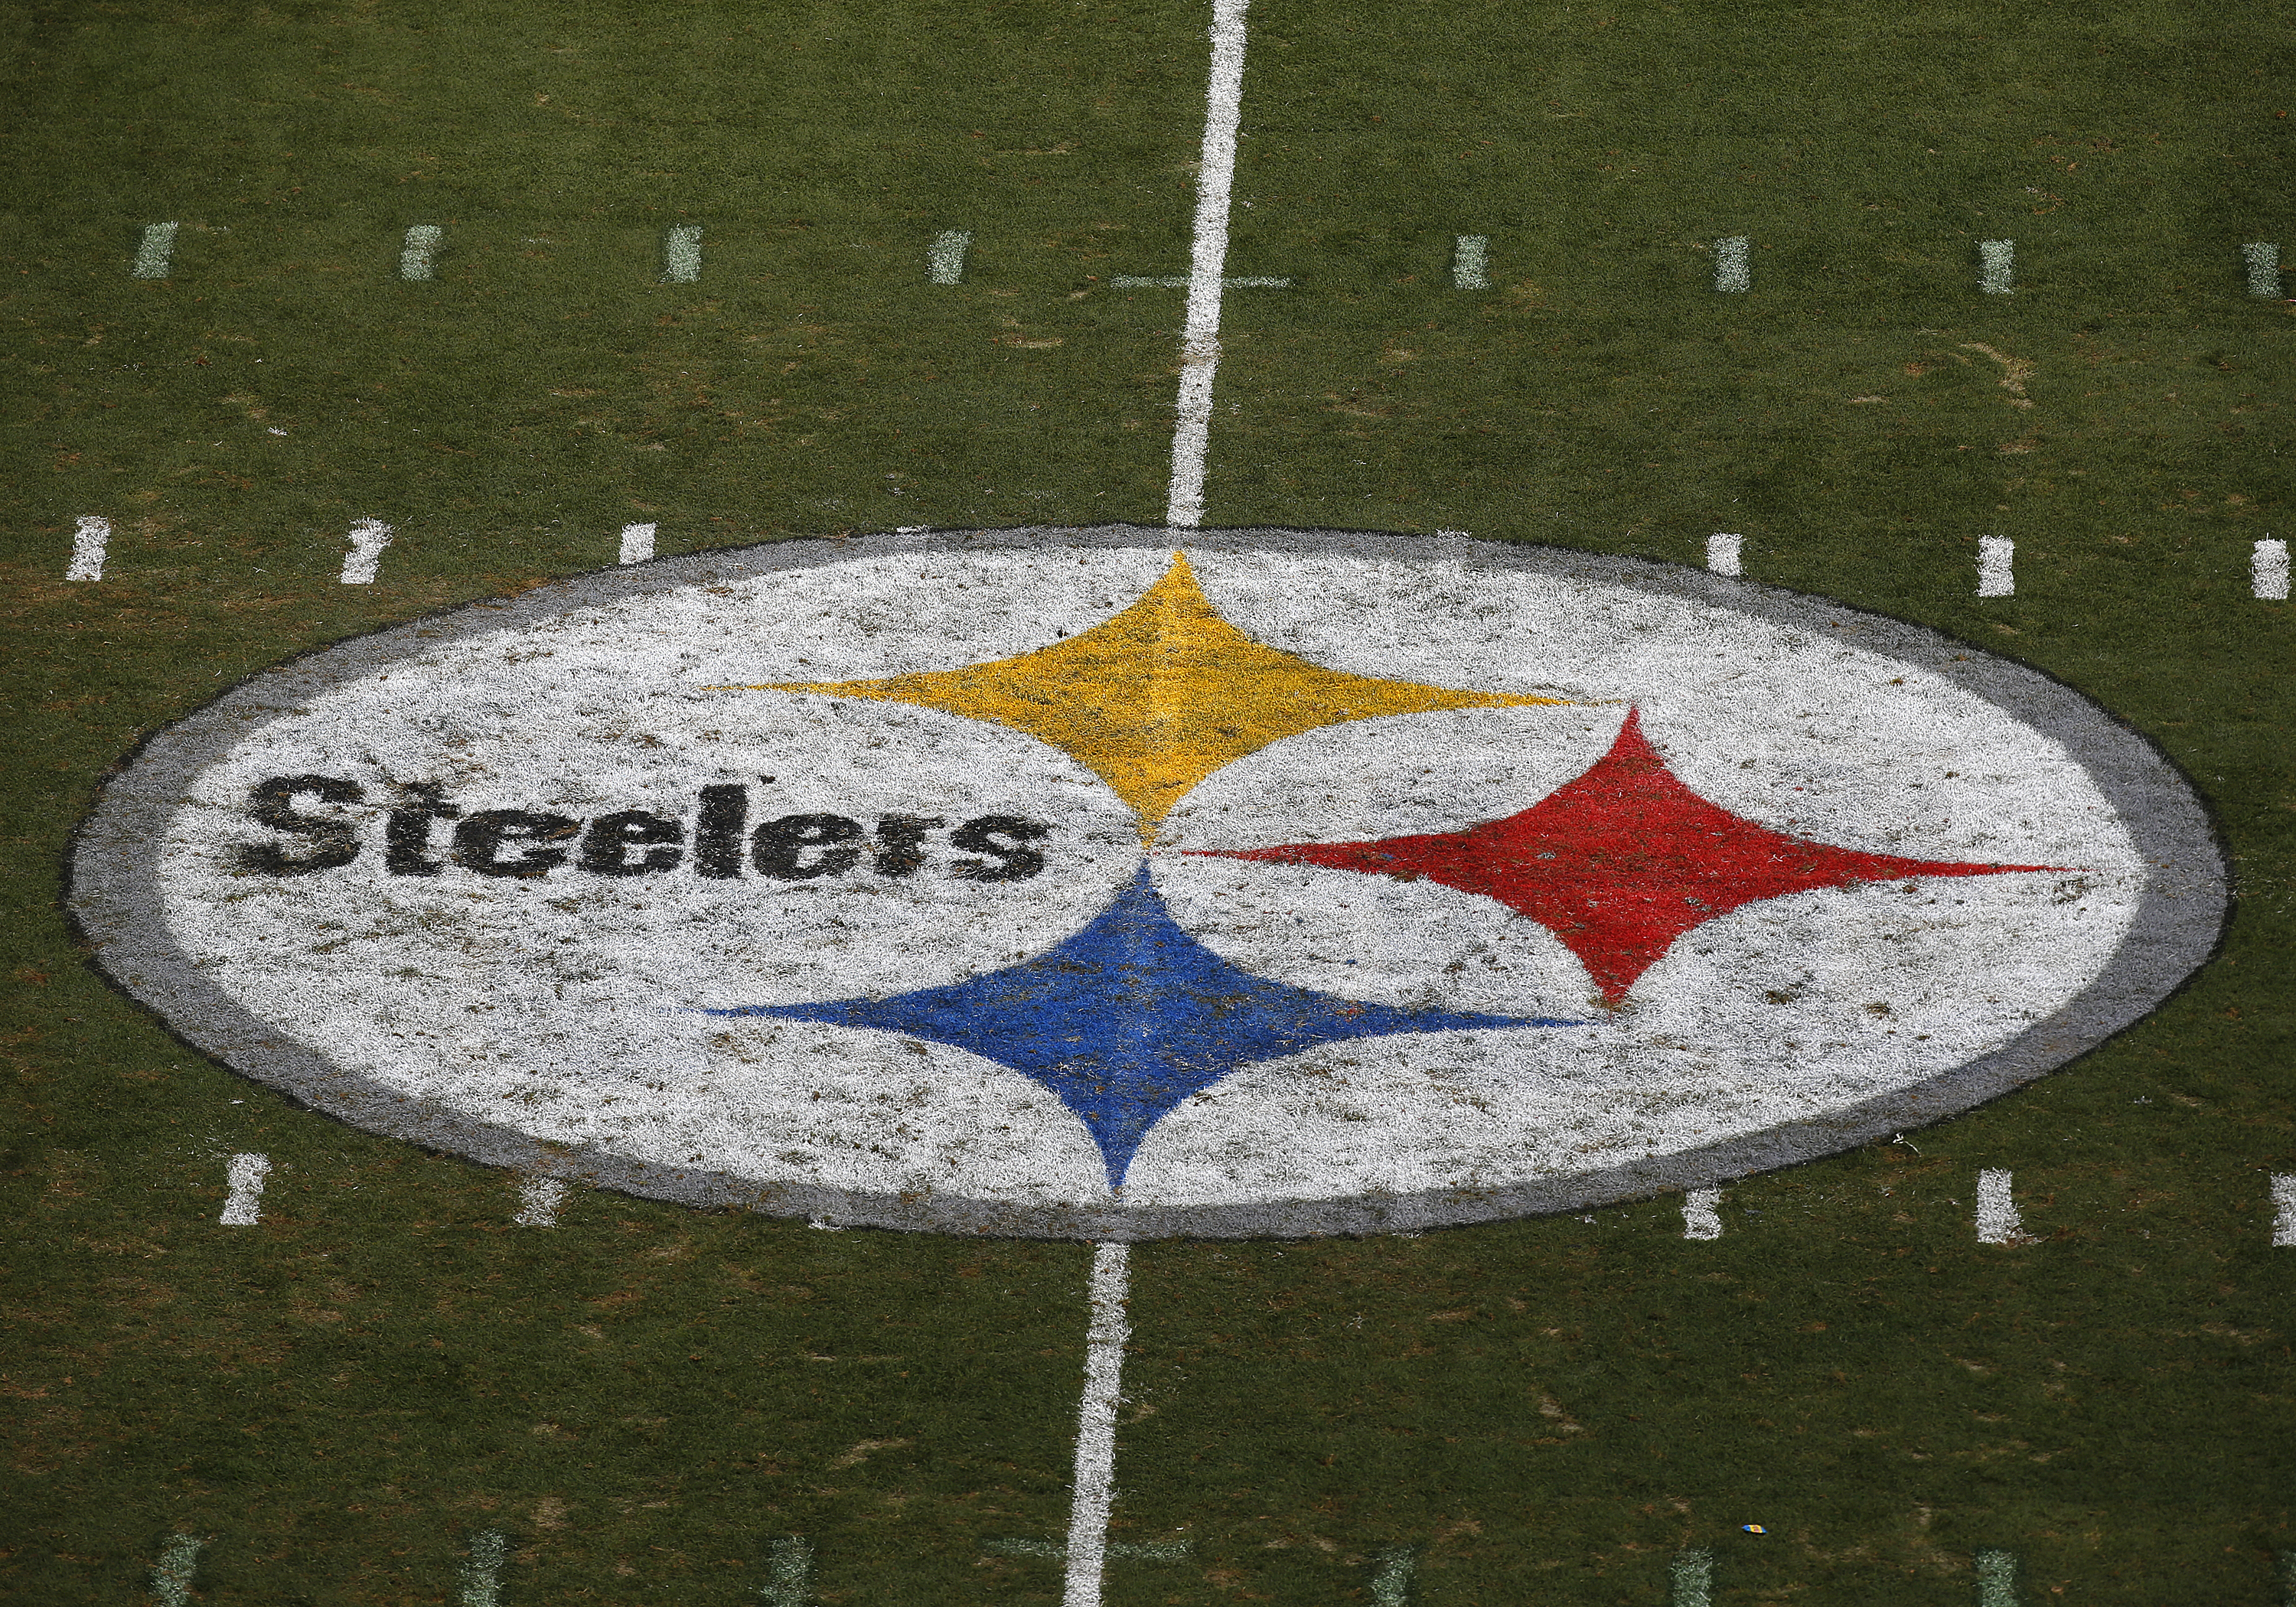 The Pittsburgh Steelers logo is seen at mid-field during the game between the Pittsburgh Steelers and the Kansas City Chiefs on September 16, 2018 at Heinz Field in Pittsburgh, Pennsylvania.